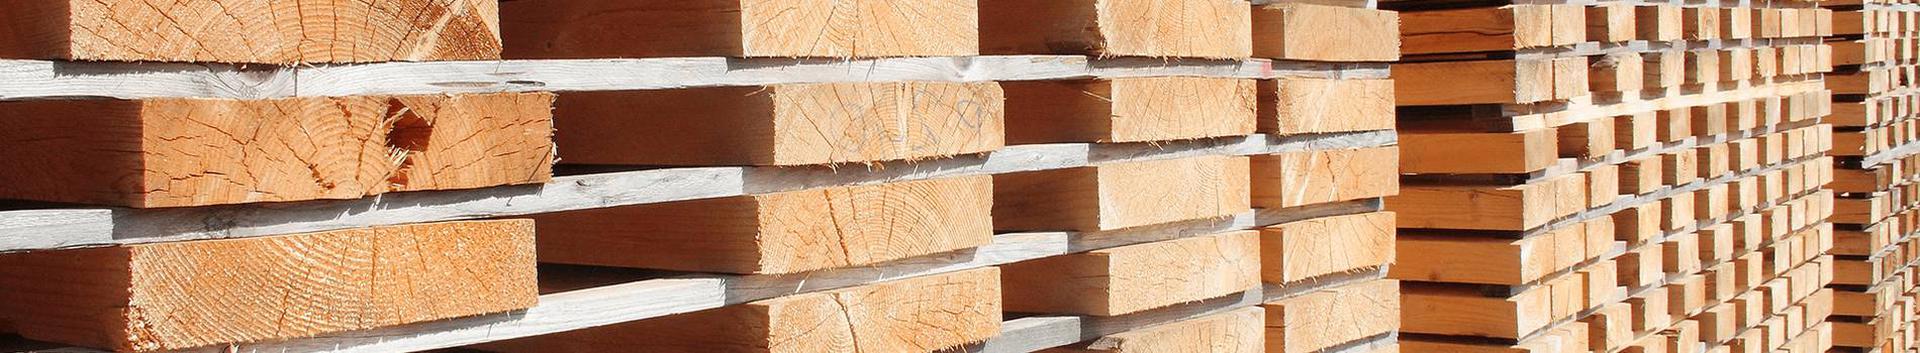 timber for construction and other related services, products, consultations